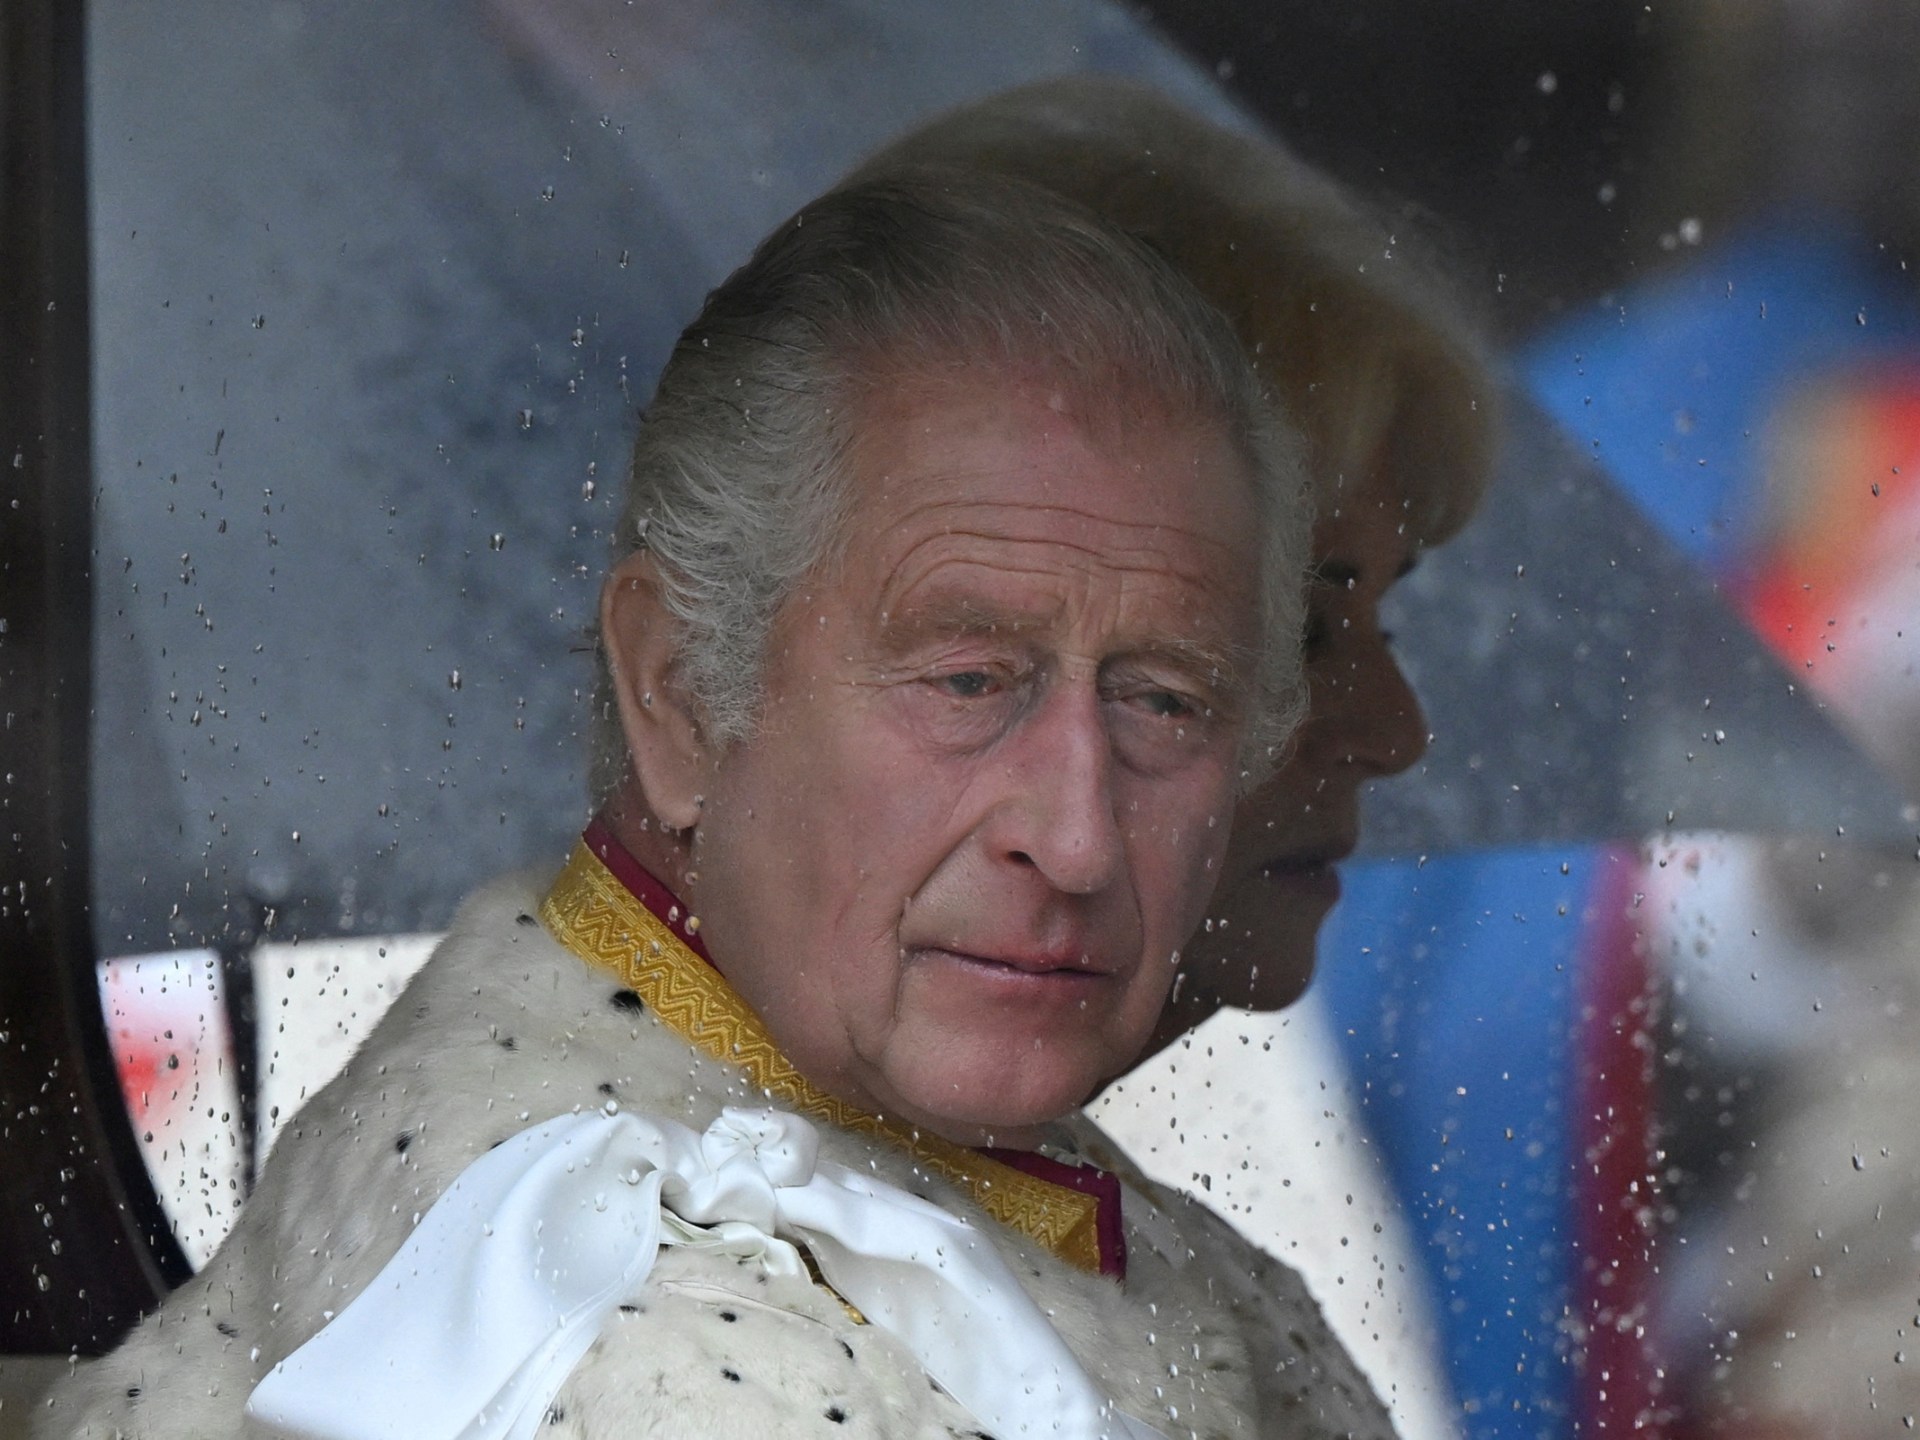 UK’s King Charles admitted to hospital for prostate treatment | Health News